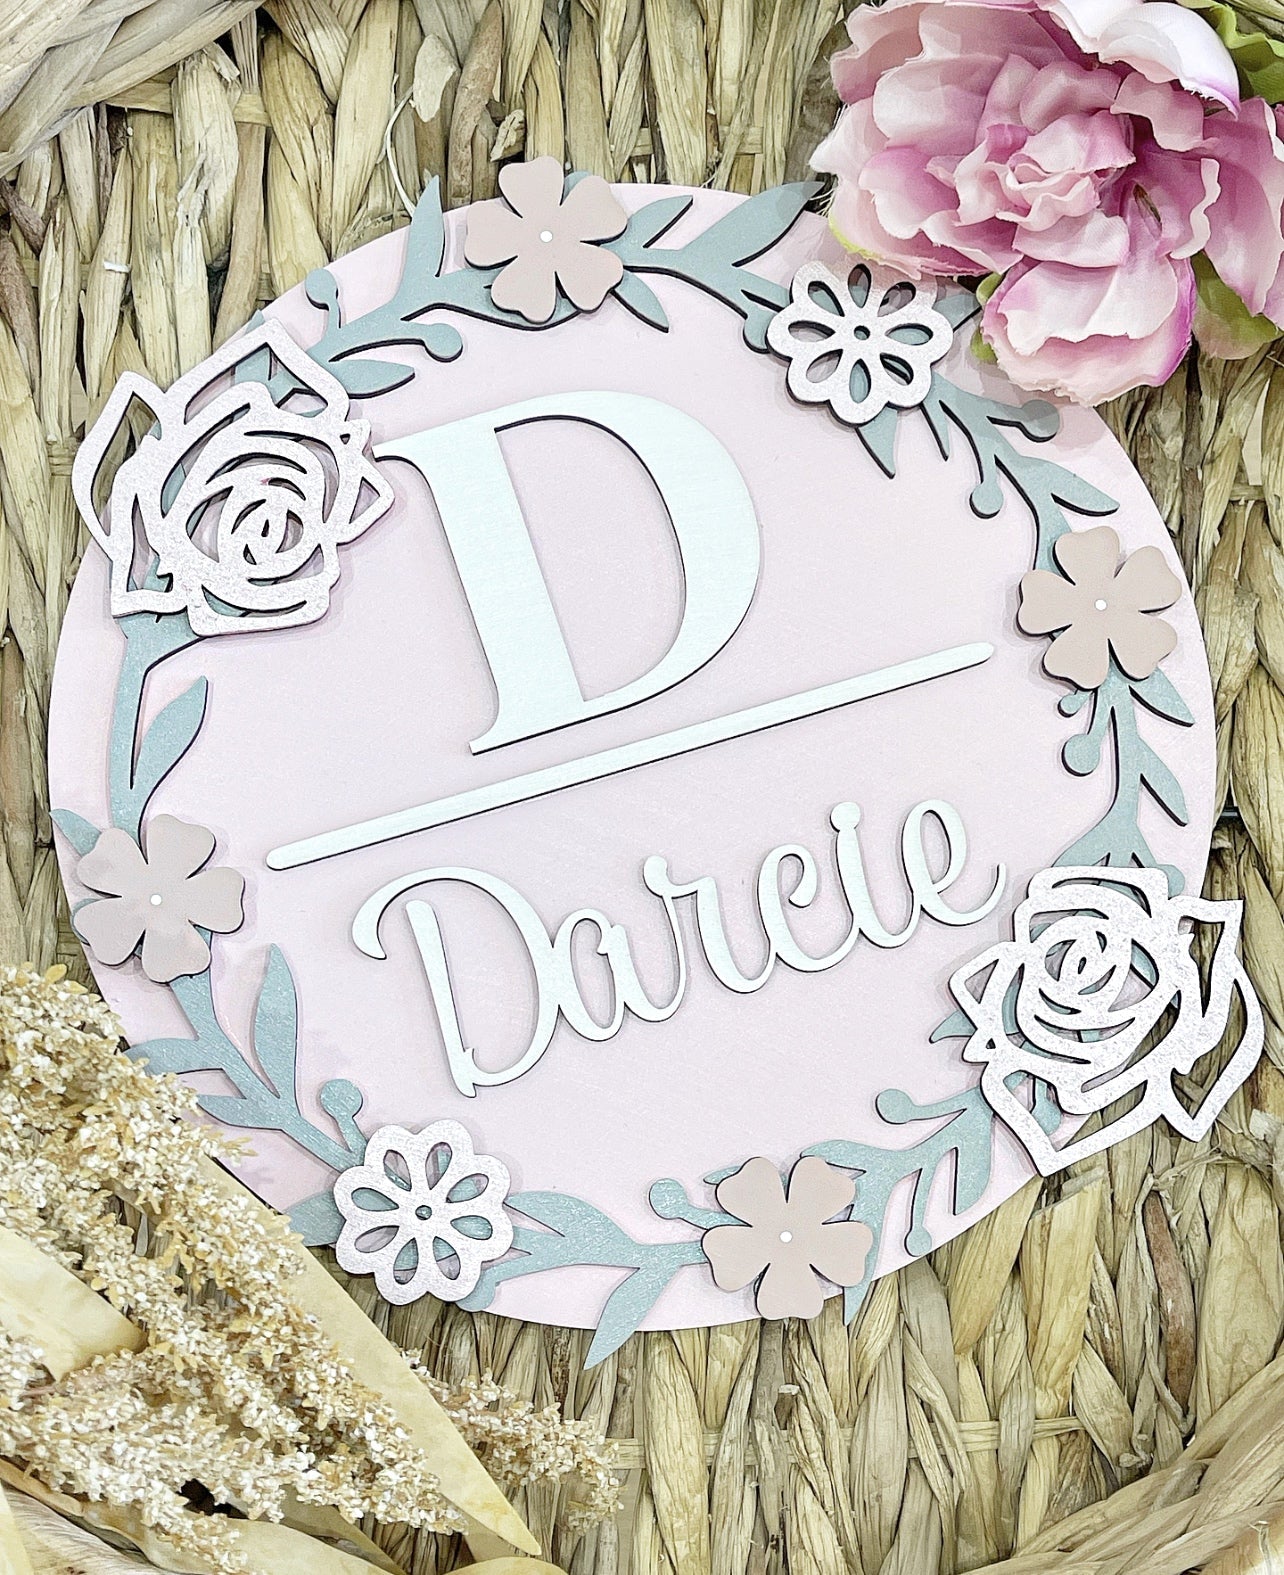 Floral Rose Plaque - Cute as a Button by Laura